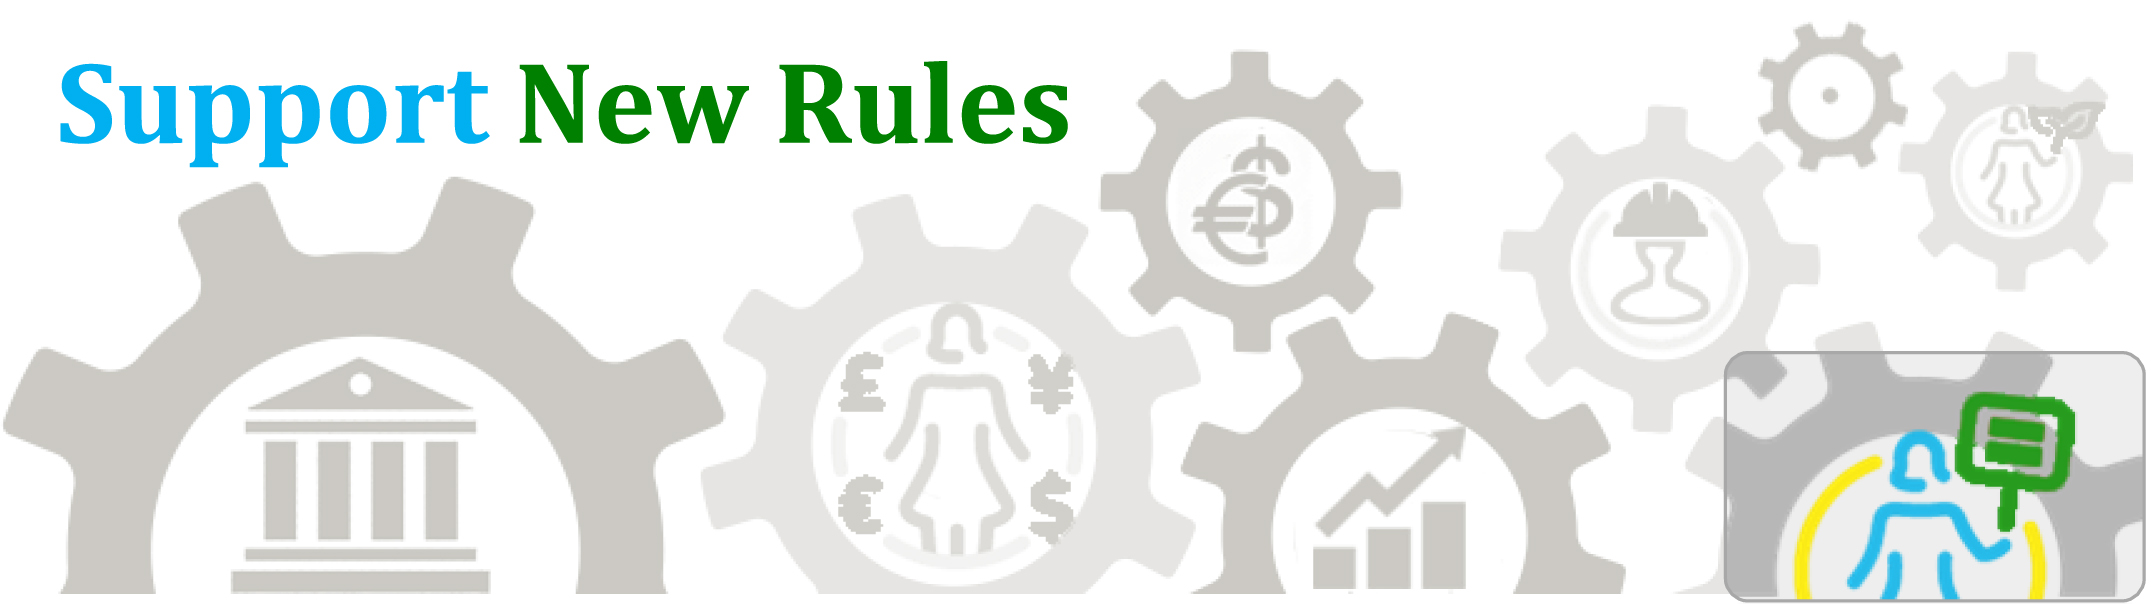 Support New Rules image